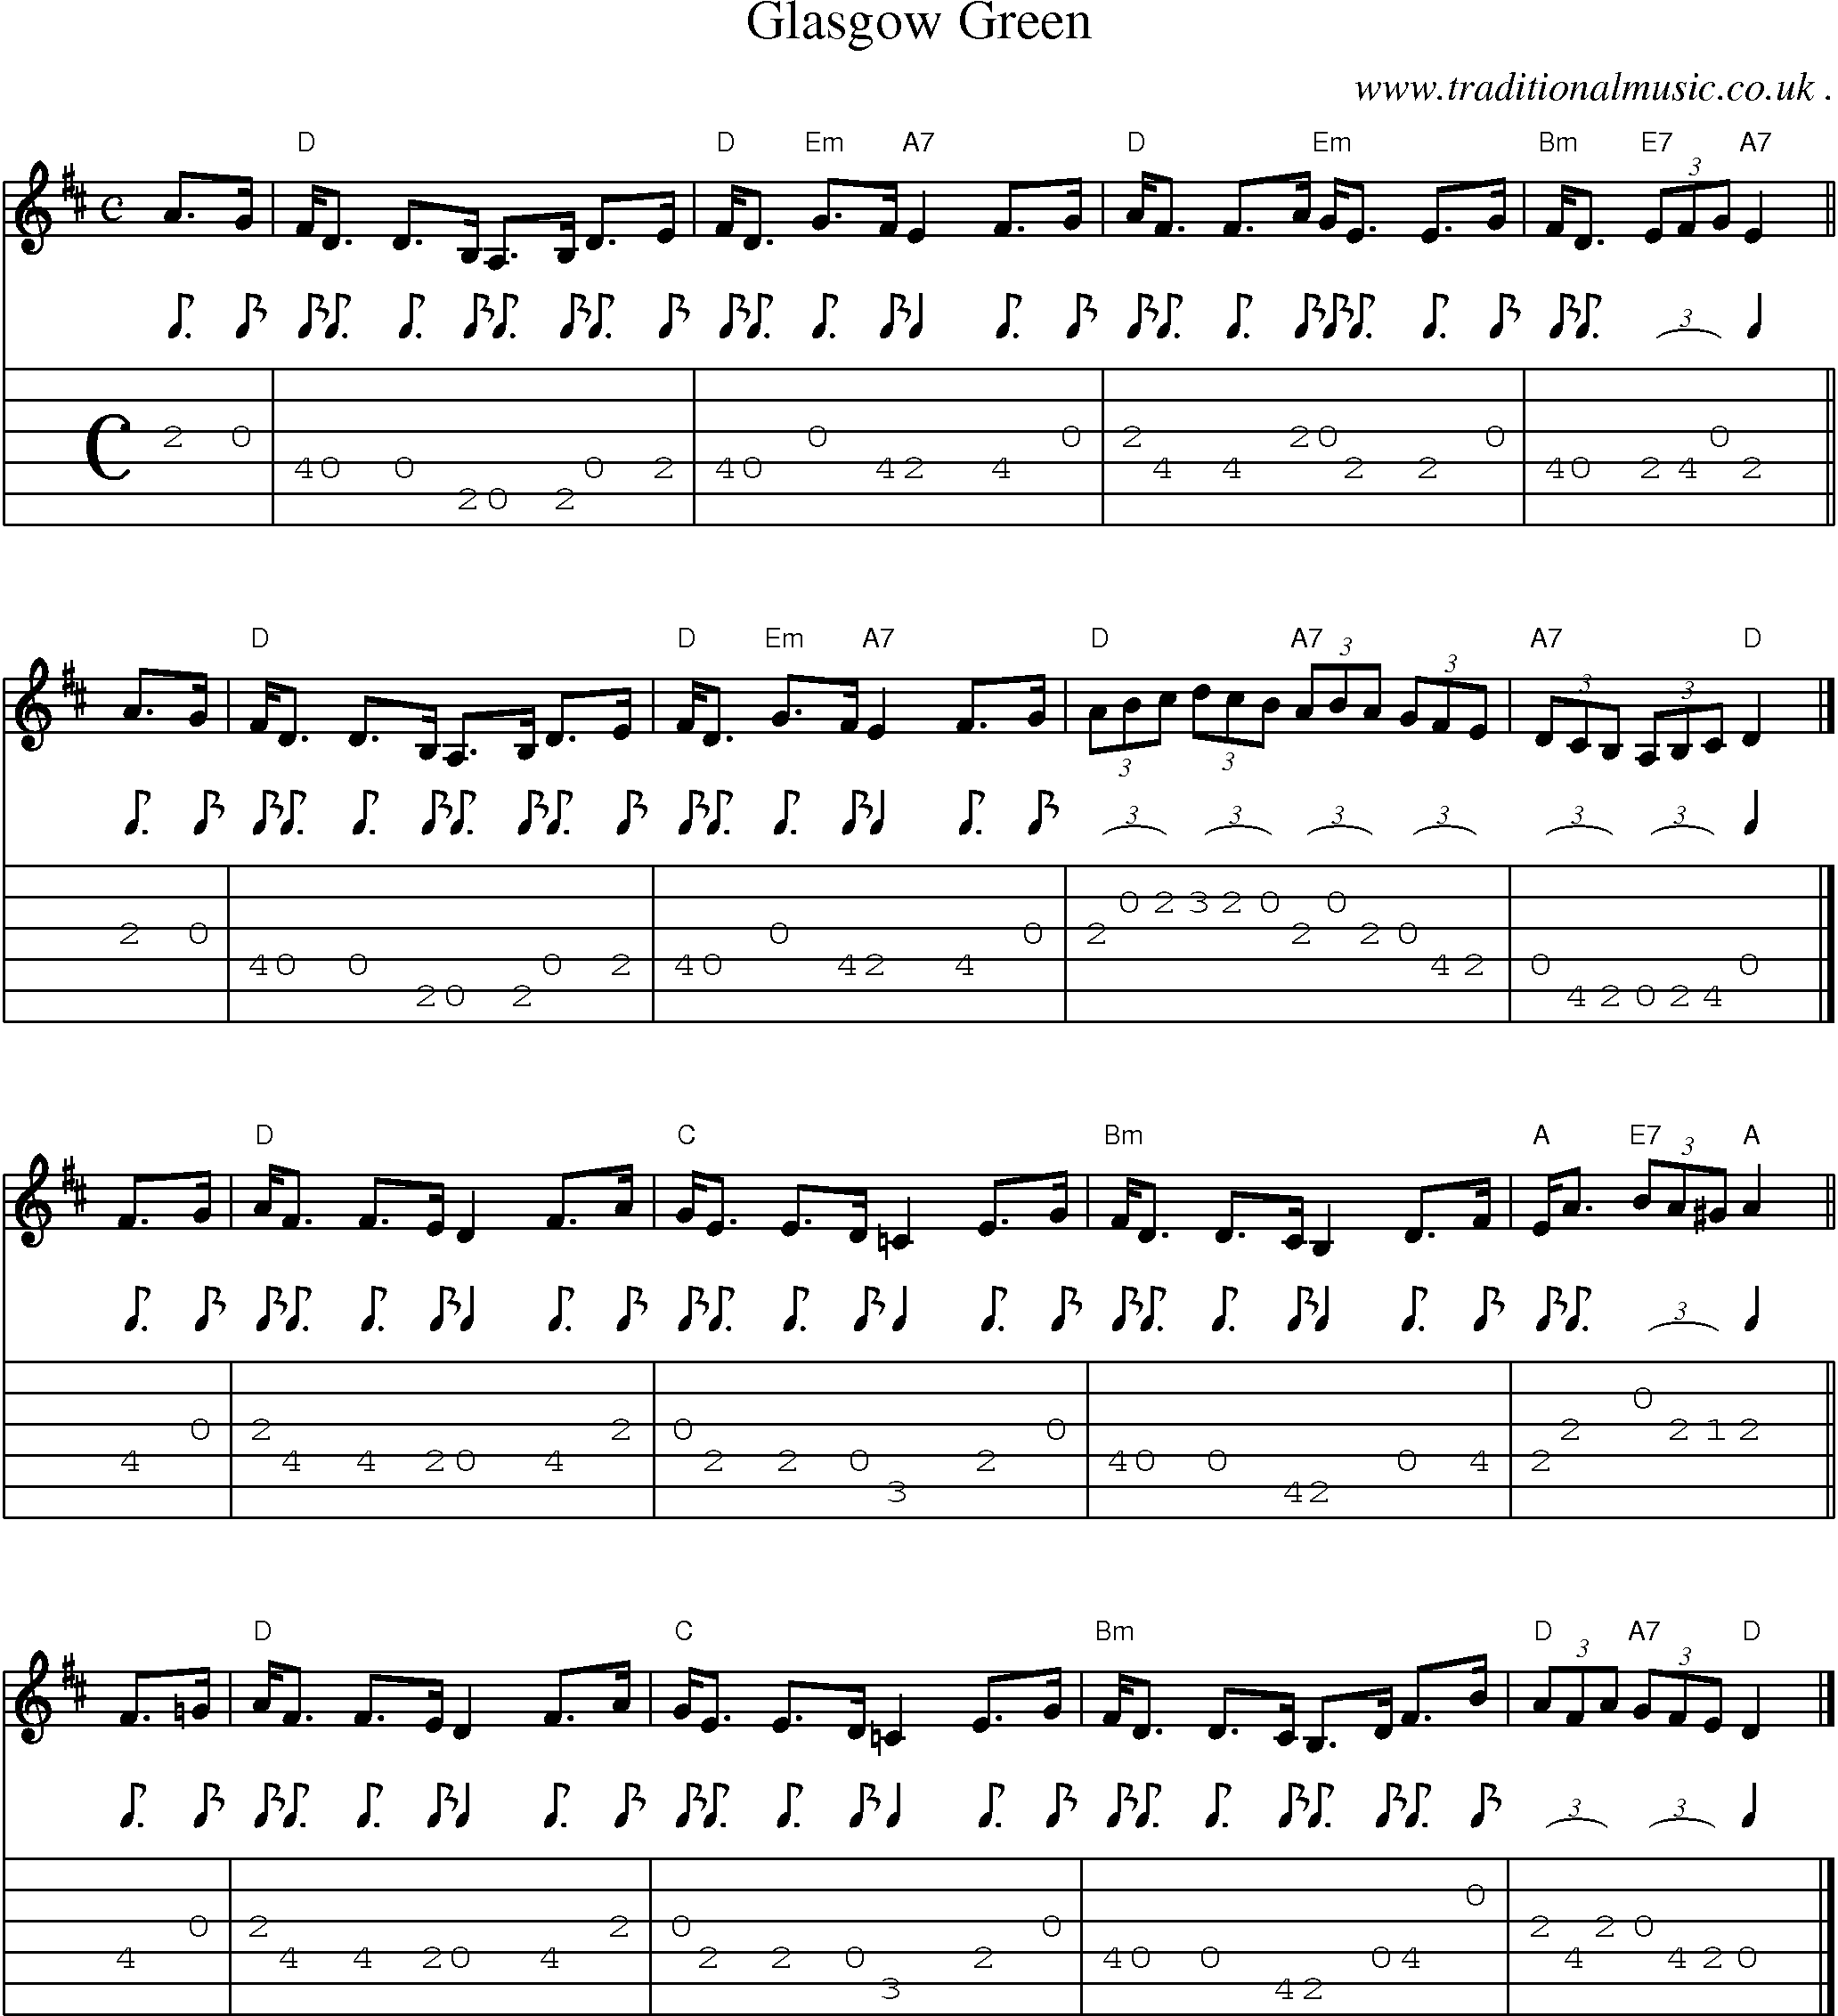 Sheet-music  score, Chords and Guitar Tabs for Glasgow Green